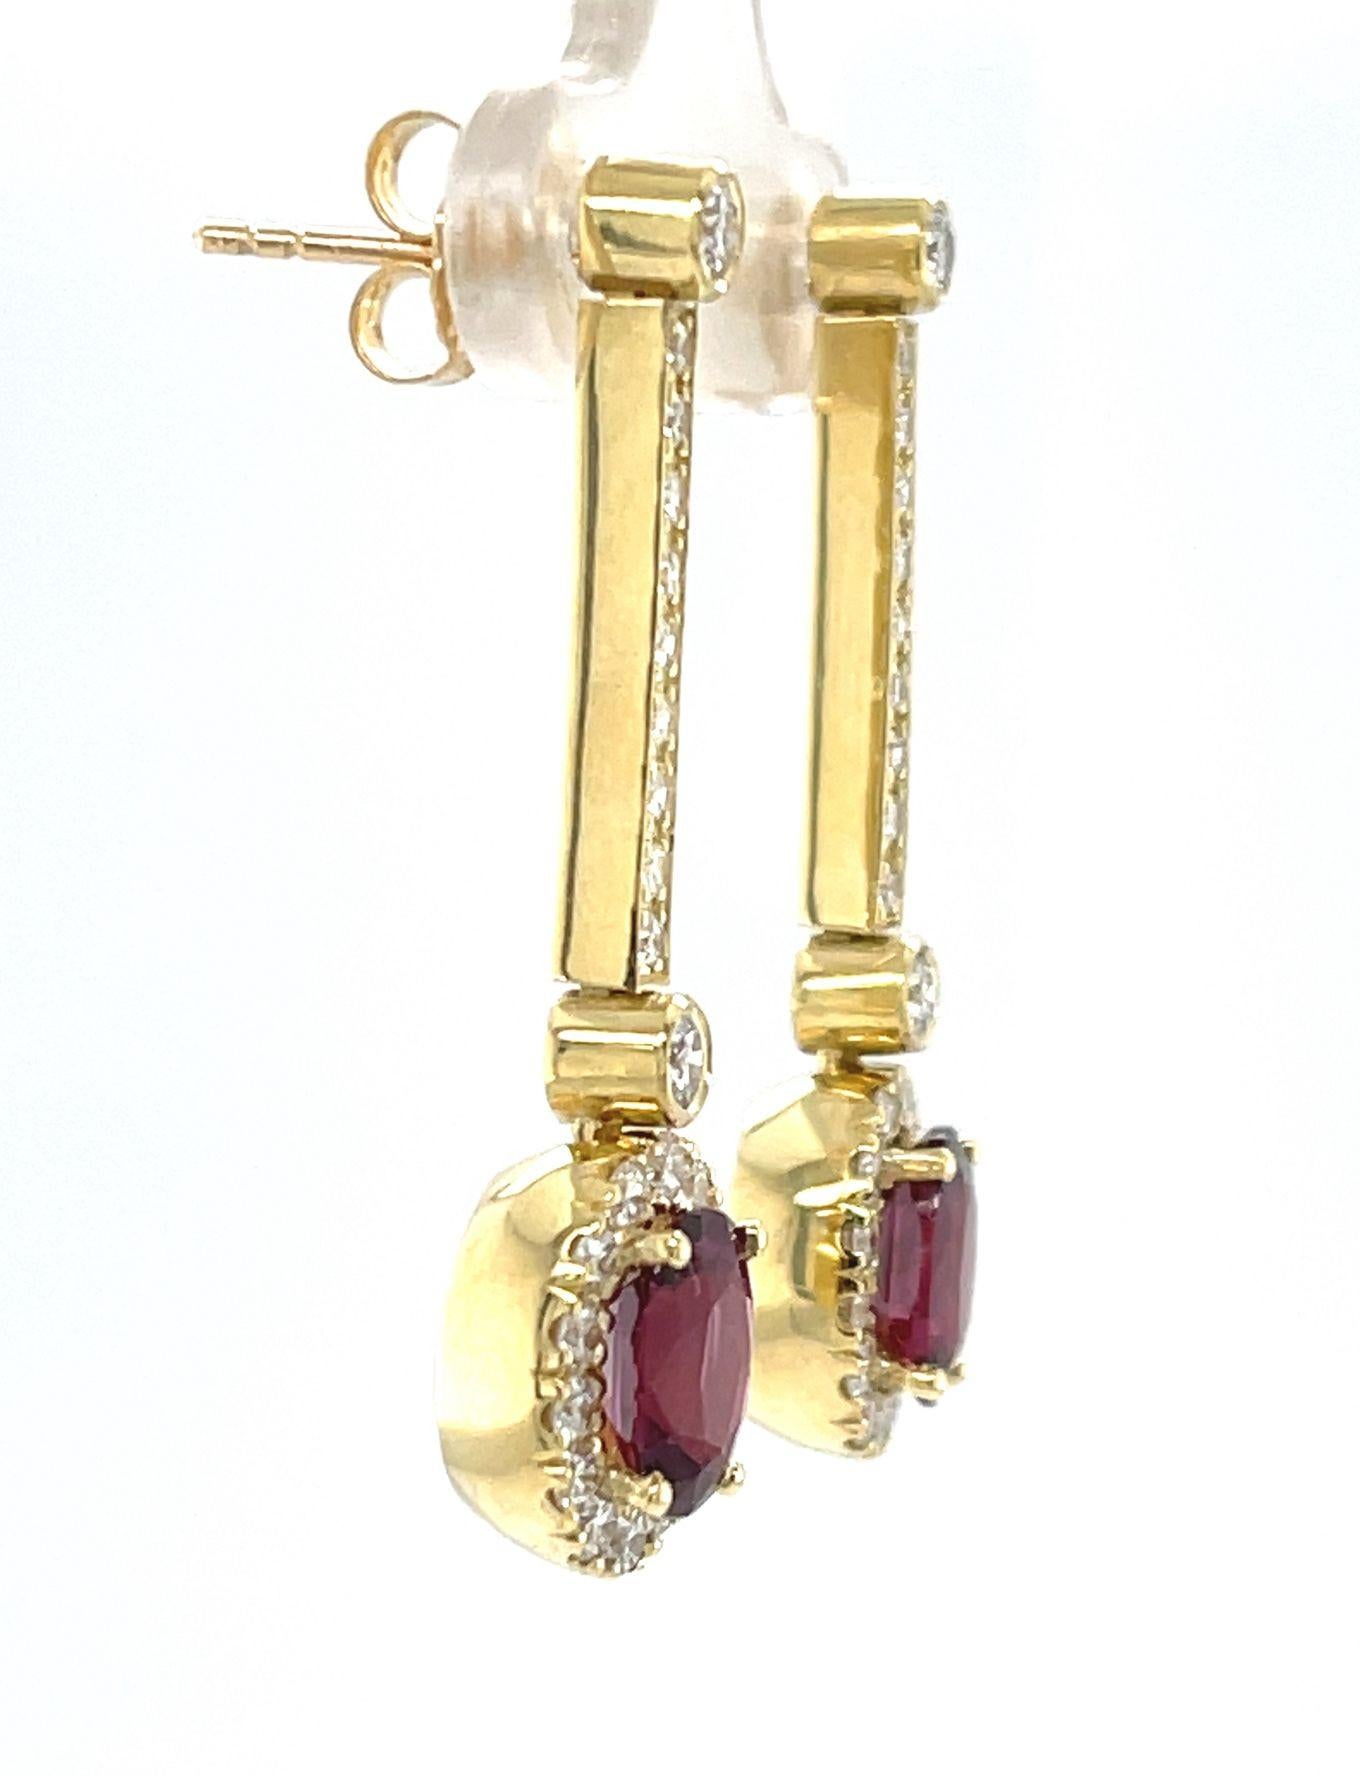 
These sophisticated and beautifully versatile earrings feature ruby and diamond drops suspended from an elegant line of sparkling diamonds! The perfectly matched oval rubies are fine quality with exceptional, bright red color. Set in 18k yellow